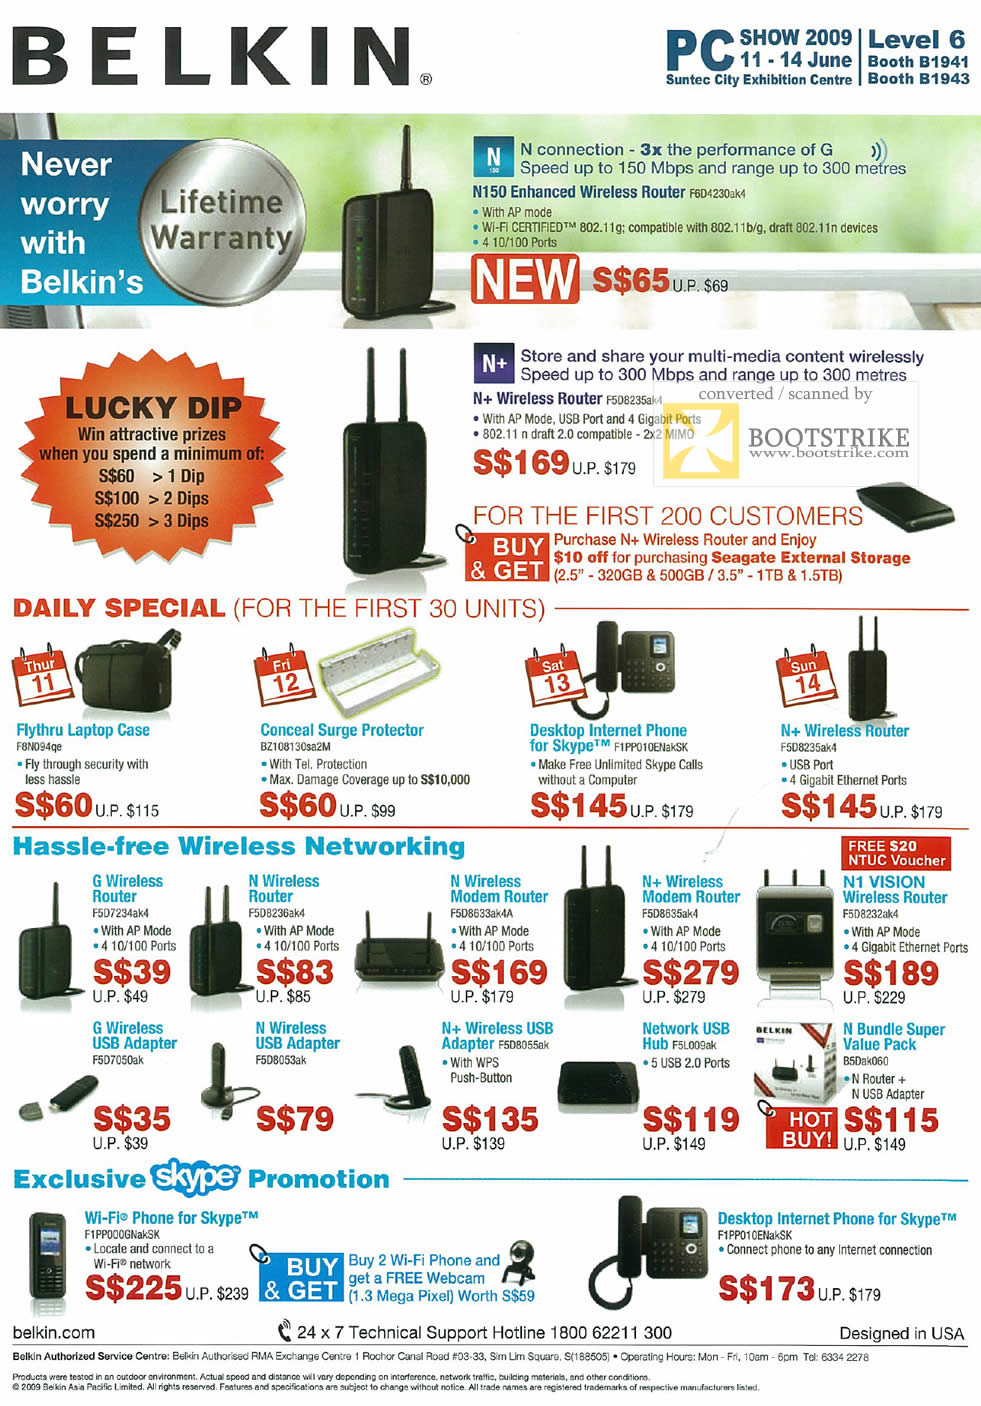 PC Show 2009 price list image brochure of Belkin N Wireless Router Laptop Case Surge Protector Skype Phone